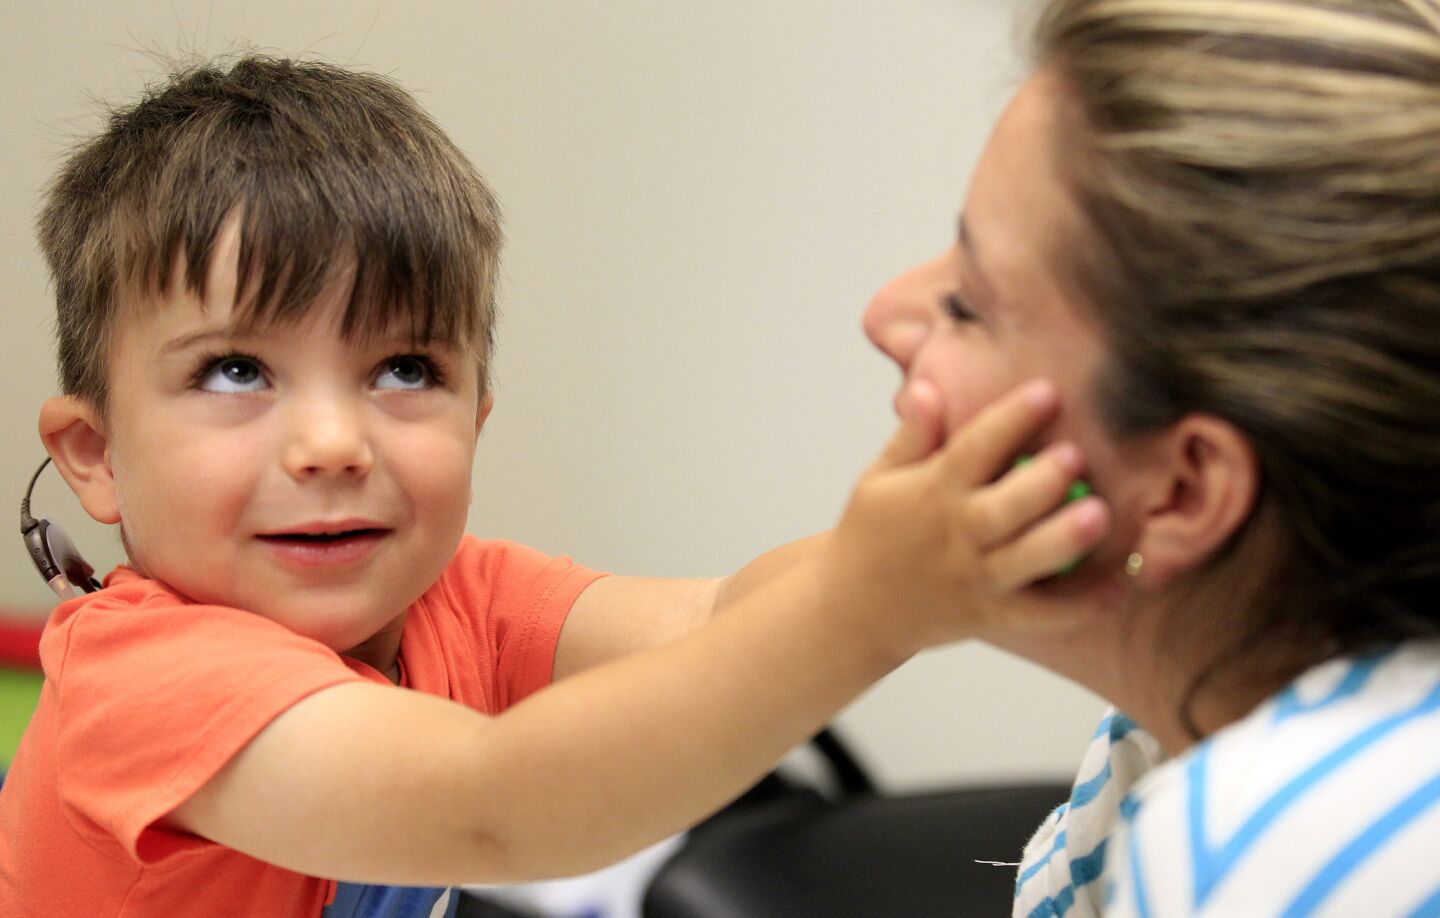 Auguste listens for a series of tones as he participates in the testing of his new ABI device with his mother, Sophie Gareau, and audiologists at USC Center for Childhood Communication.